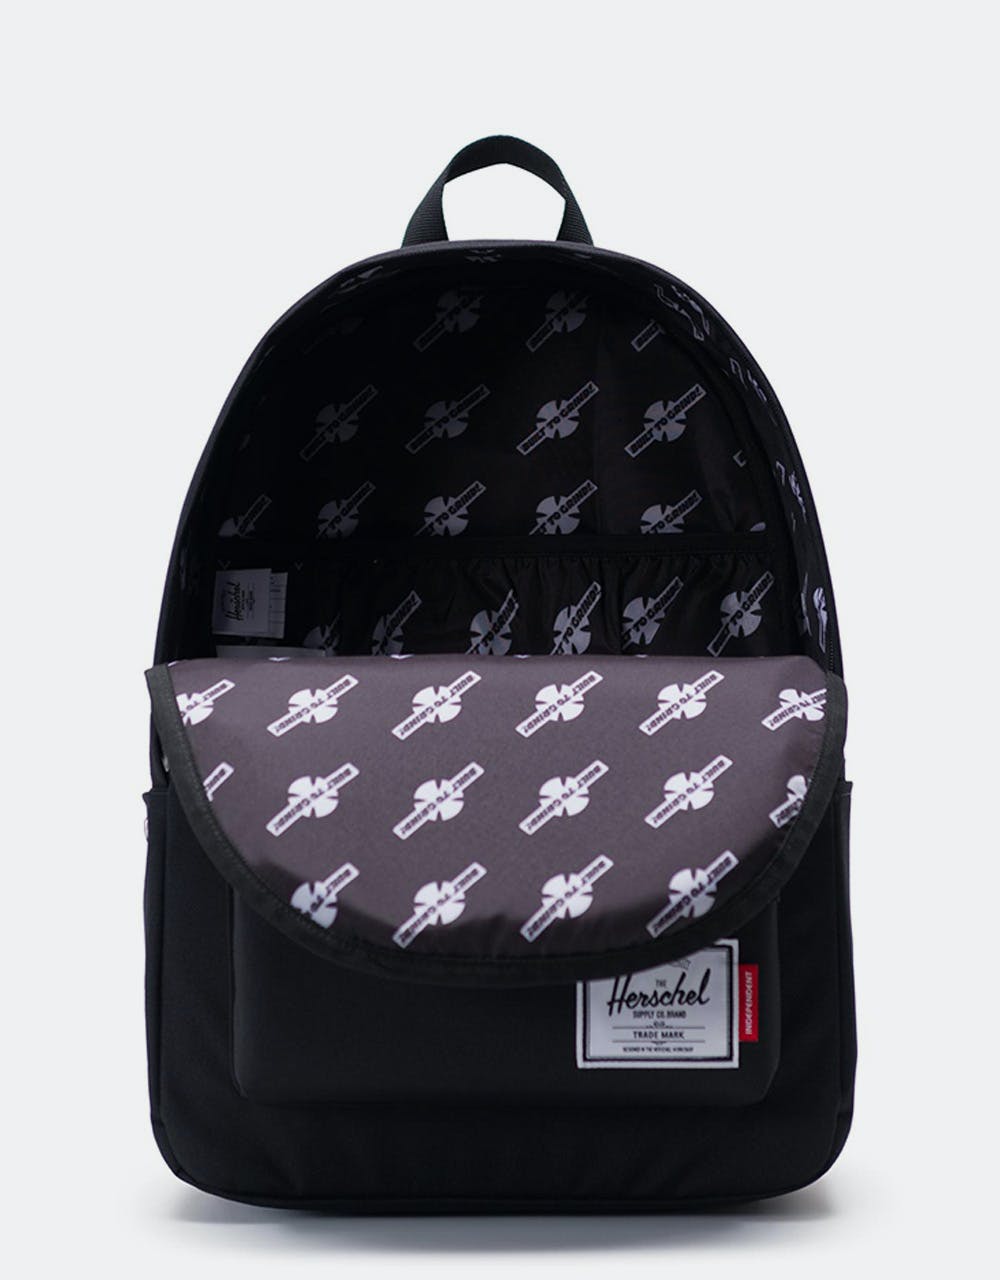 Herschel Supply Co. x Independent Classic X-Large Backpack - Black